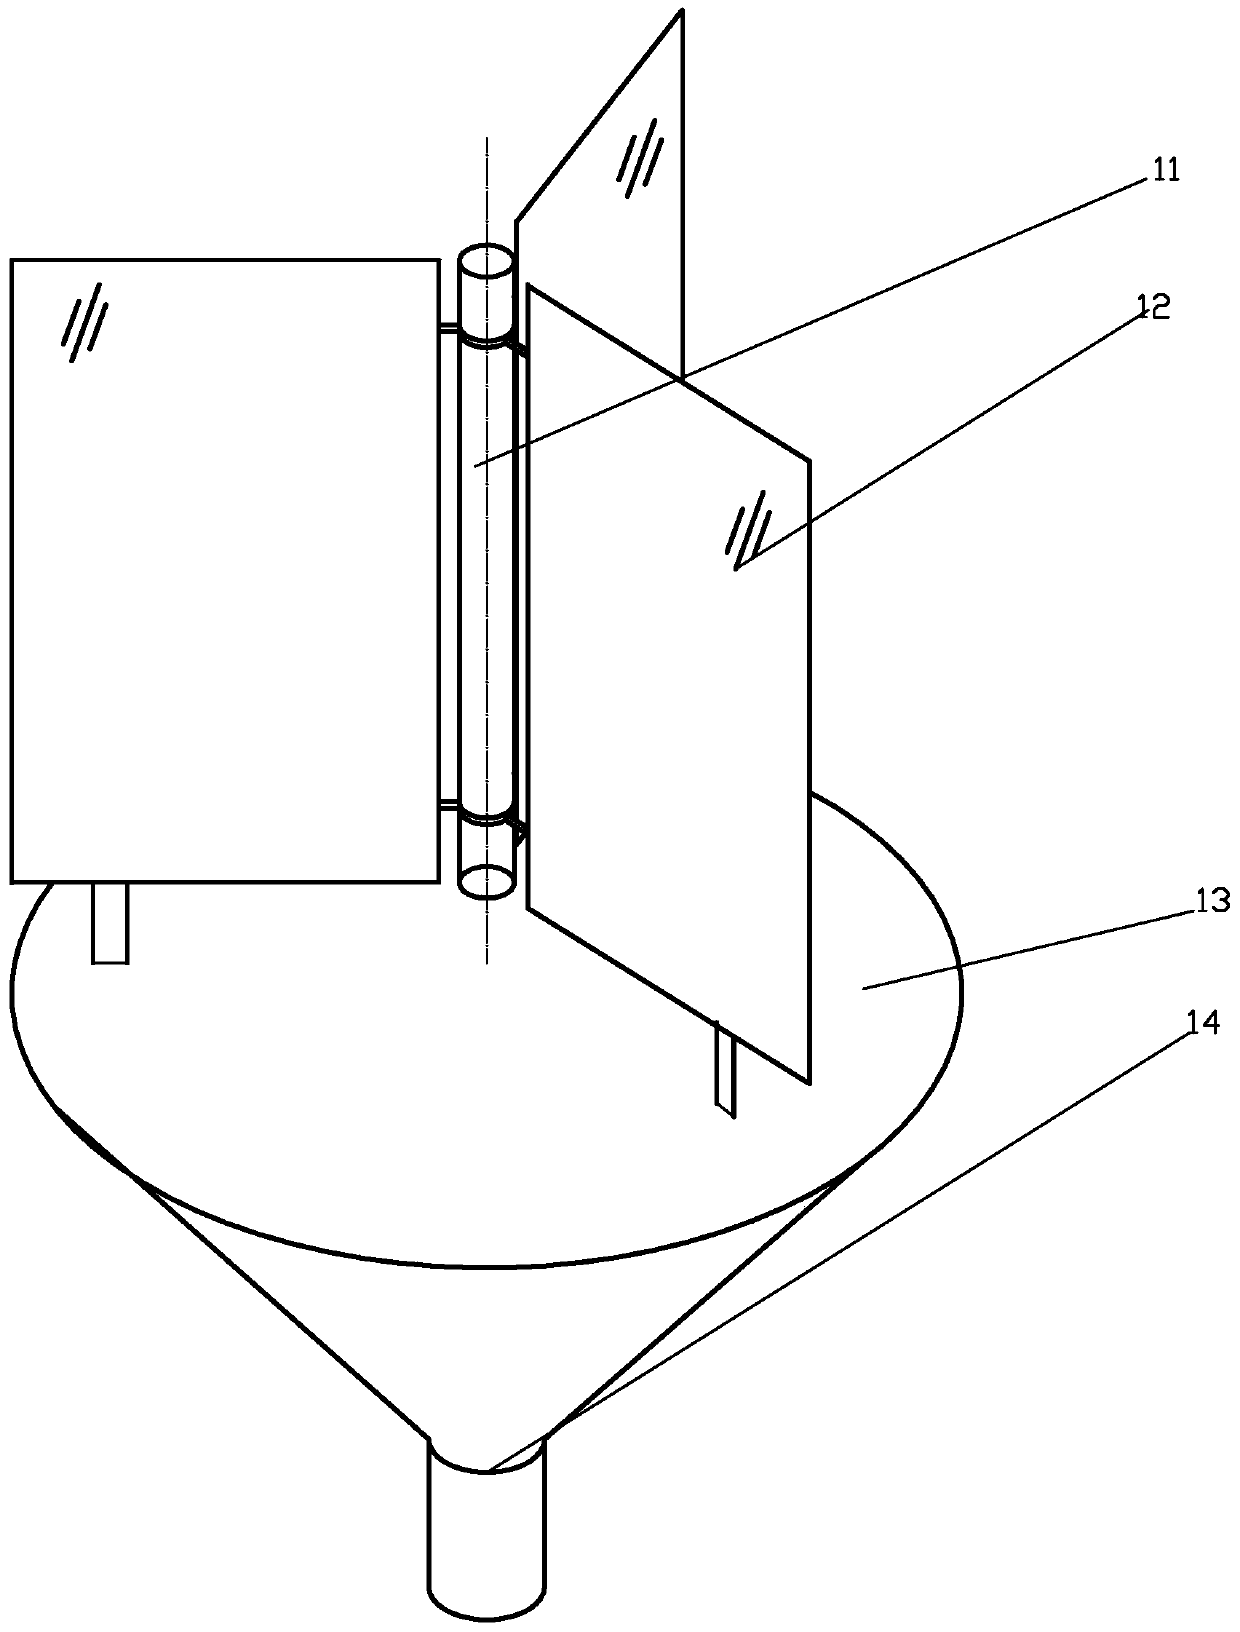 A field insect capture and treatment device